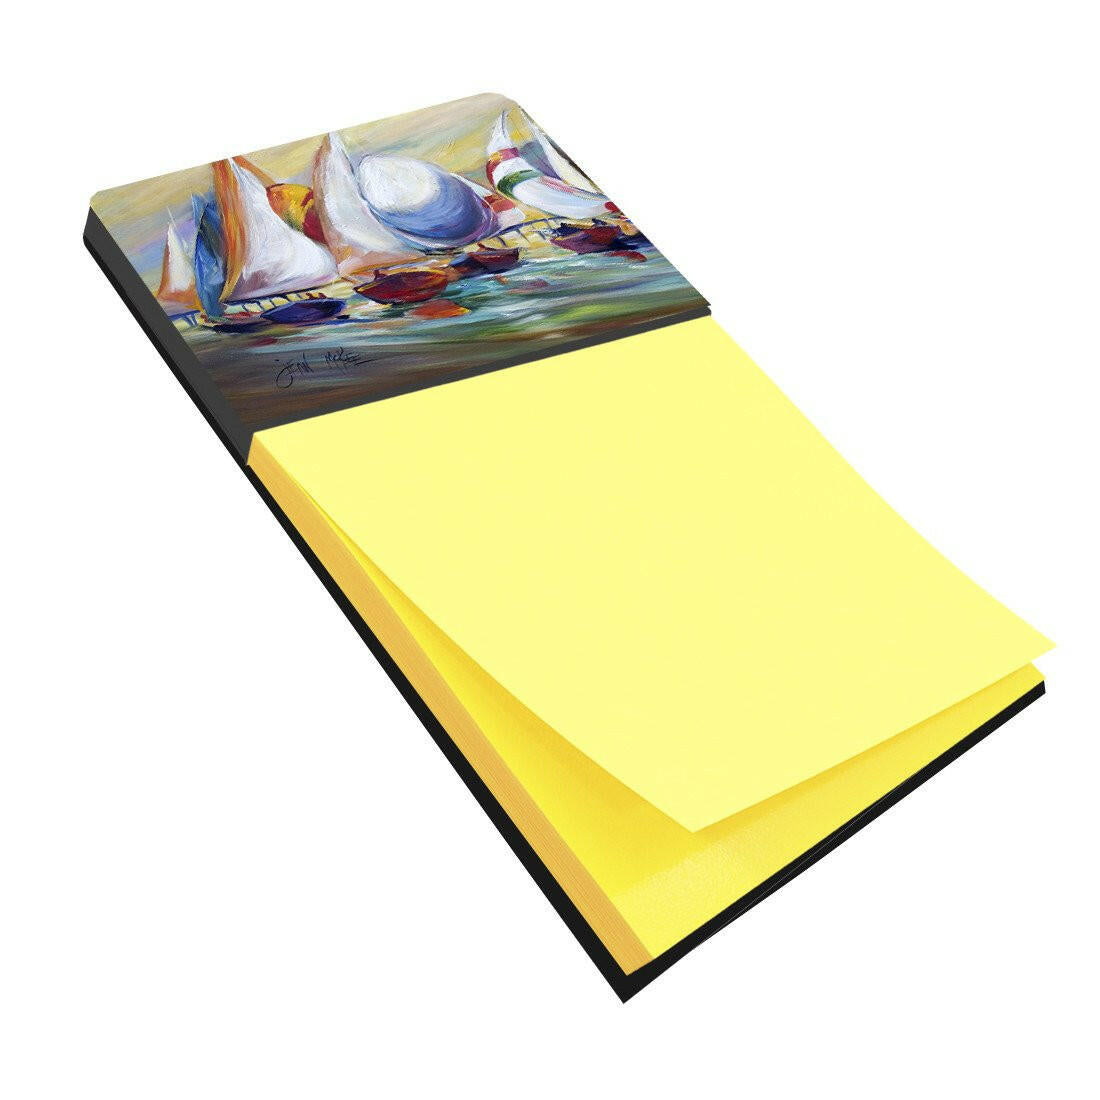 Sailboat Race in Dauphin Island Sticky Note Holder JMK1040SN by Caroline's Treasures